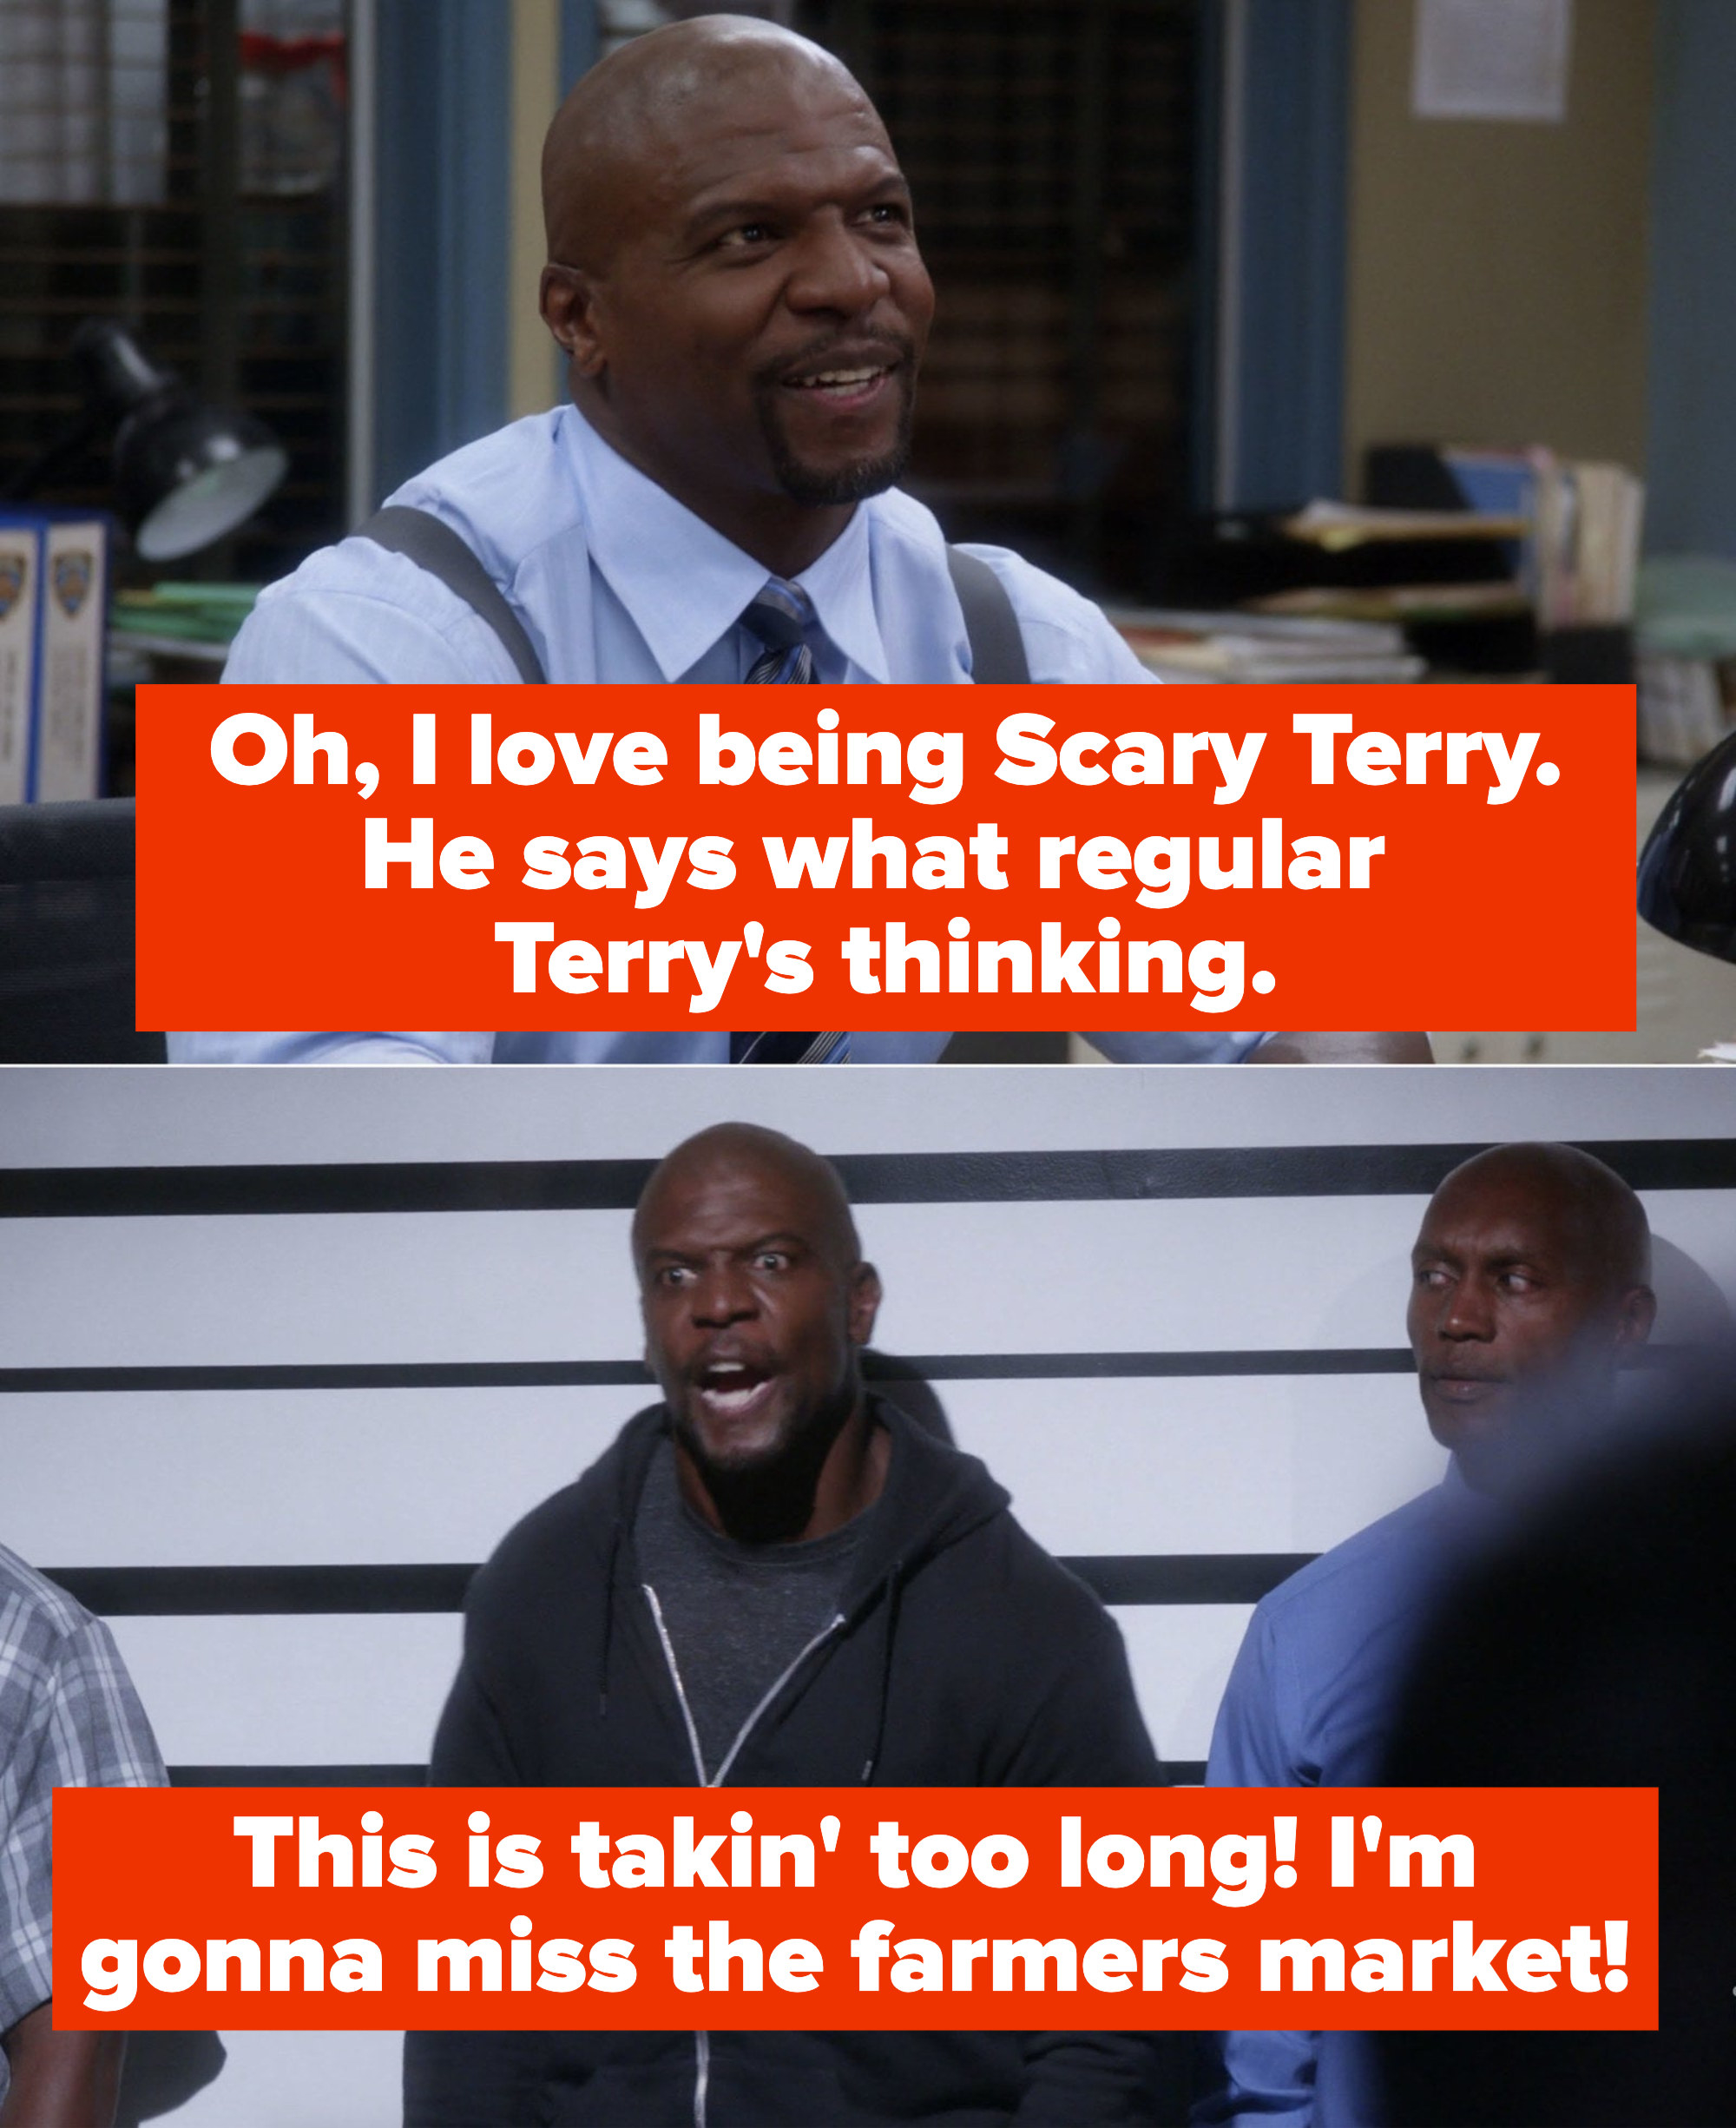 Terry: &quot;Oh, I love being Scary Terry. He says what regular Terry&#x27;s thinking&quot; Scary Terry: &quot;This is takin&#x27; too long! I&#x27;m gonna miss the farmers market!&quot;